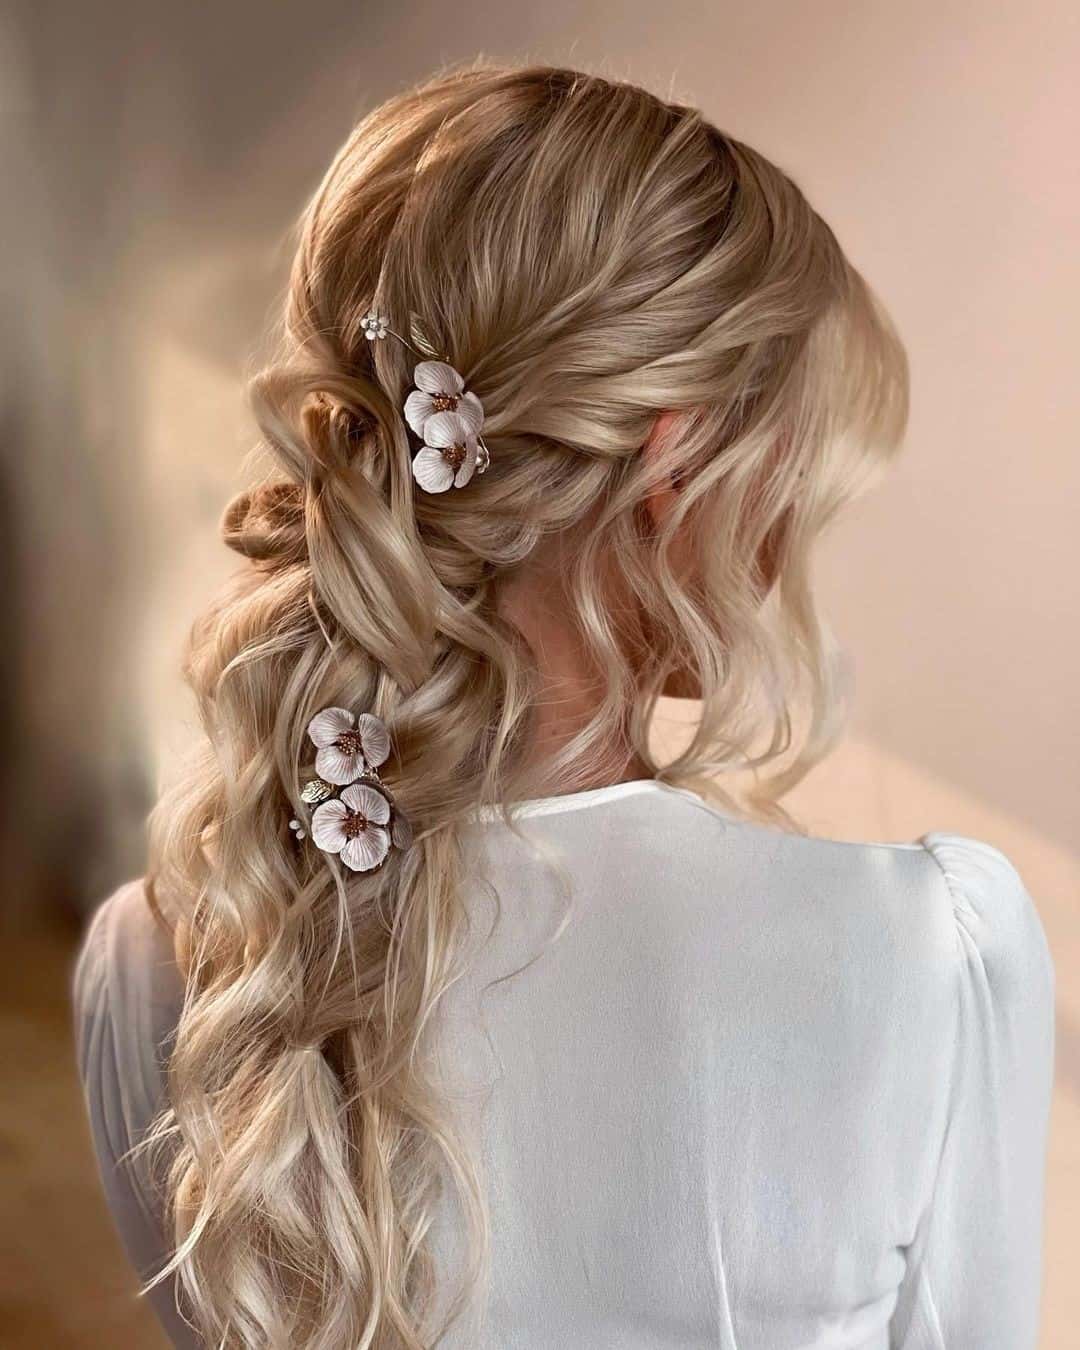 Loose Ponytail Wedding Hair For Round Face